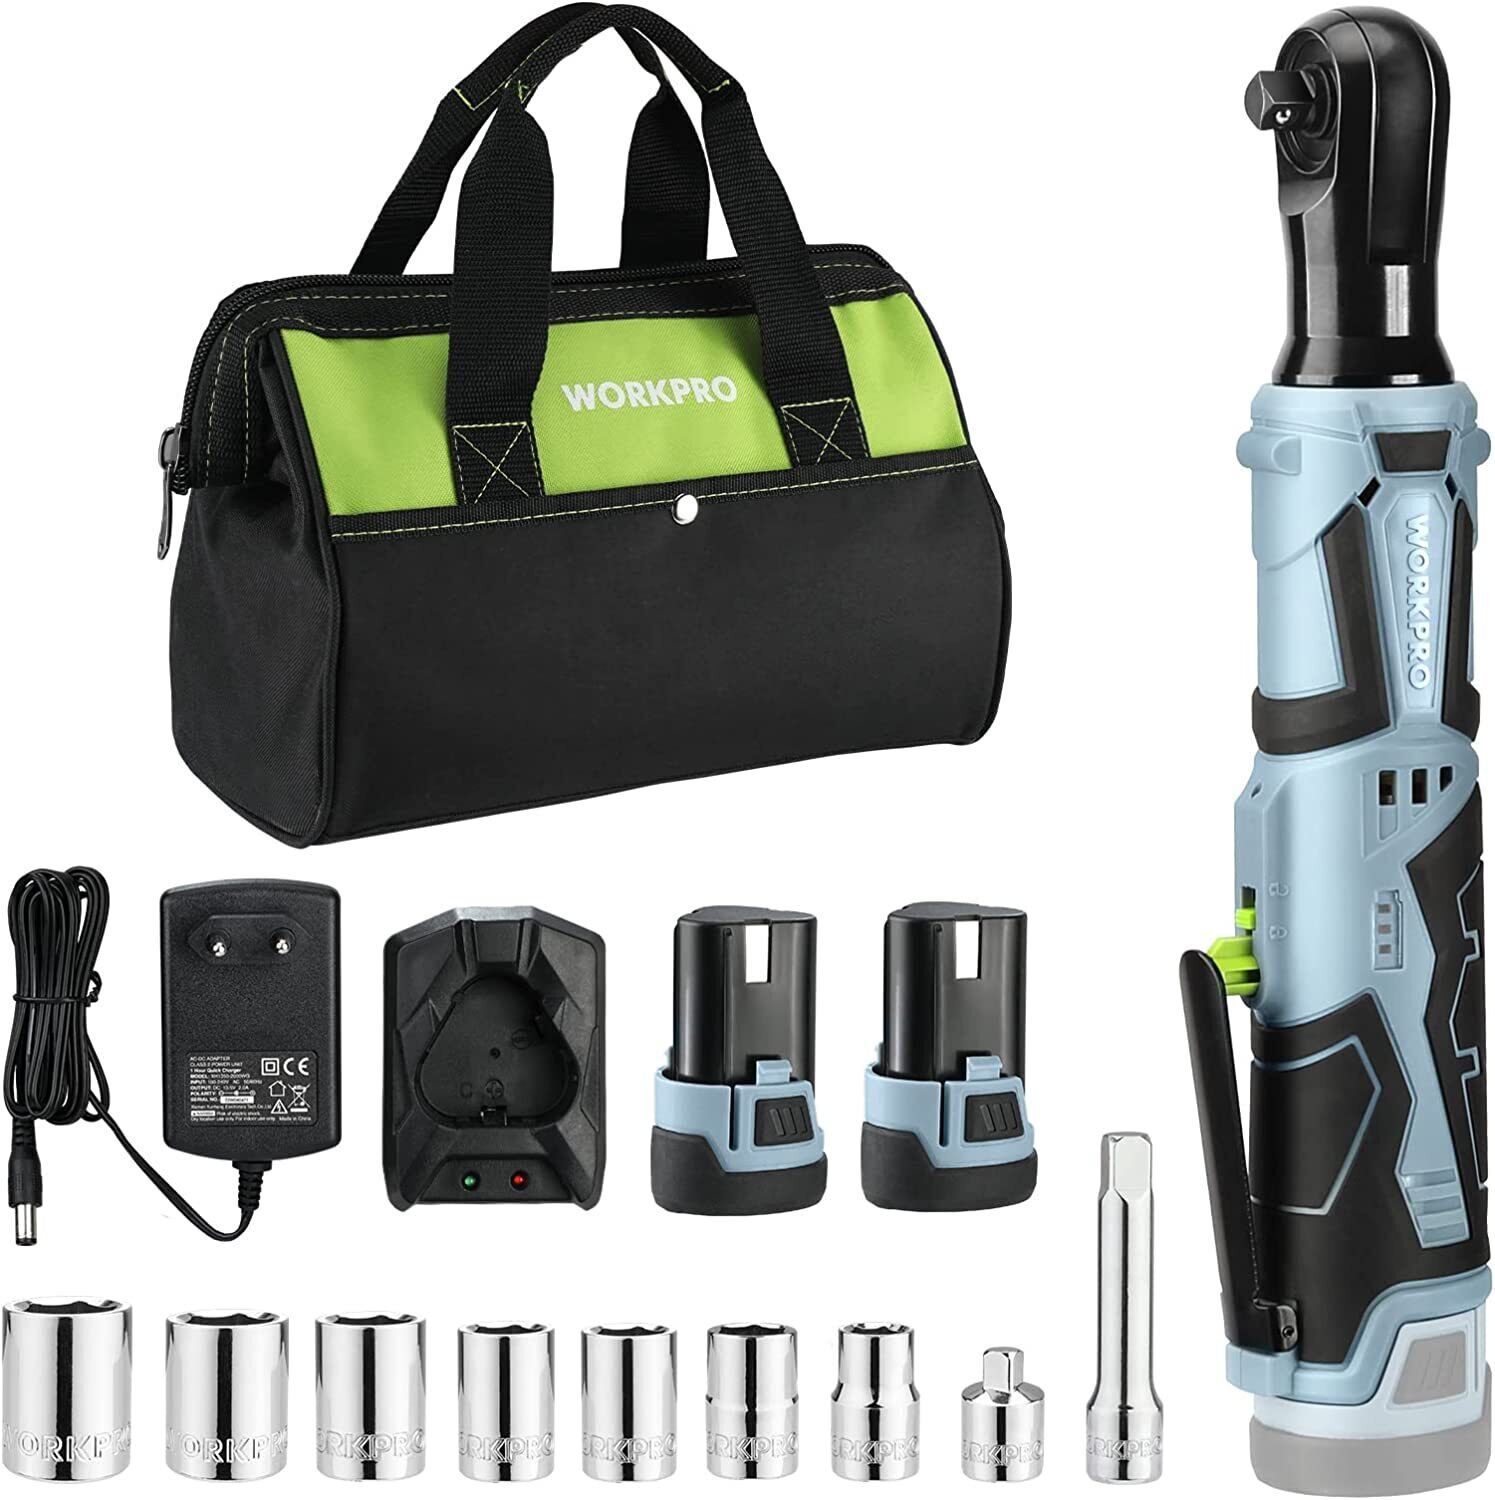 WORKPRO Cordless Electric Ratchet Wrench 3/8" 12V 40 Ft-lbs Ratchet Wrench Kits - $103.99